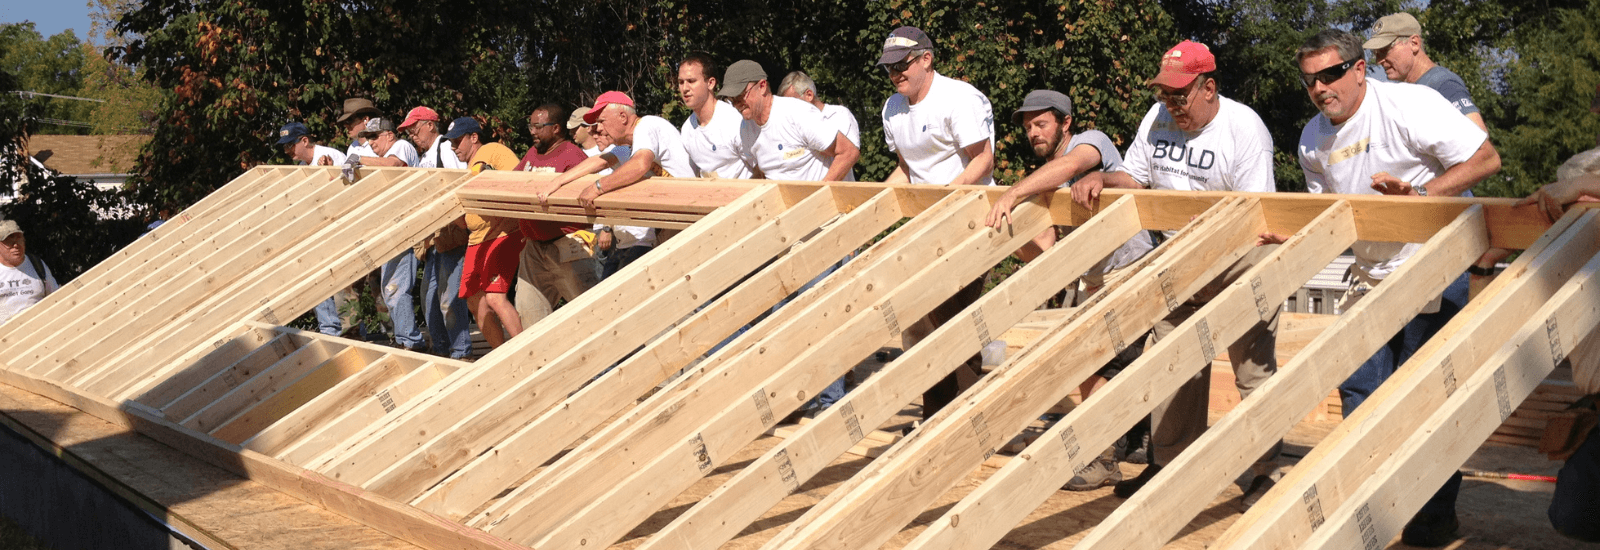 Volunteers lifting a wall together